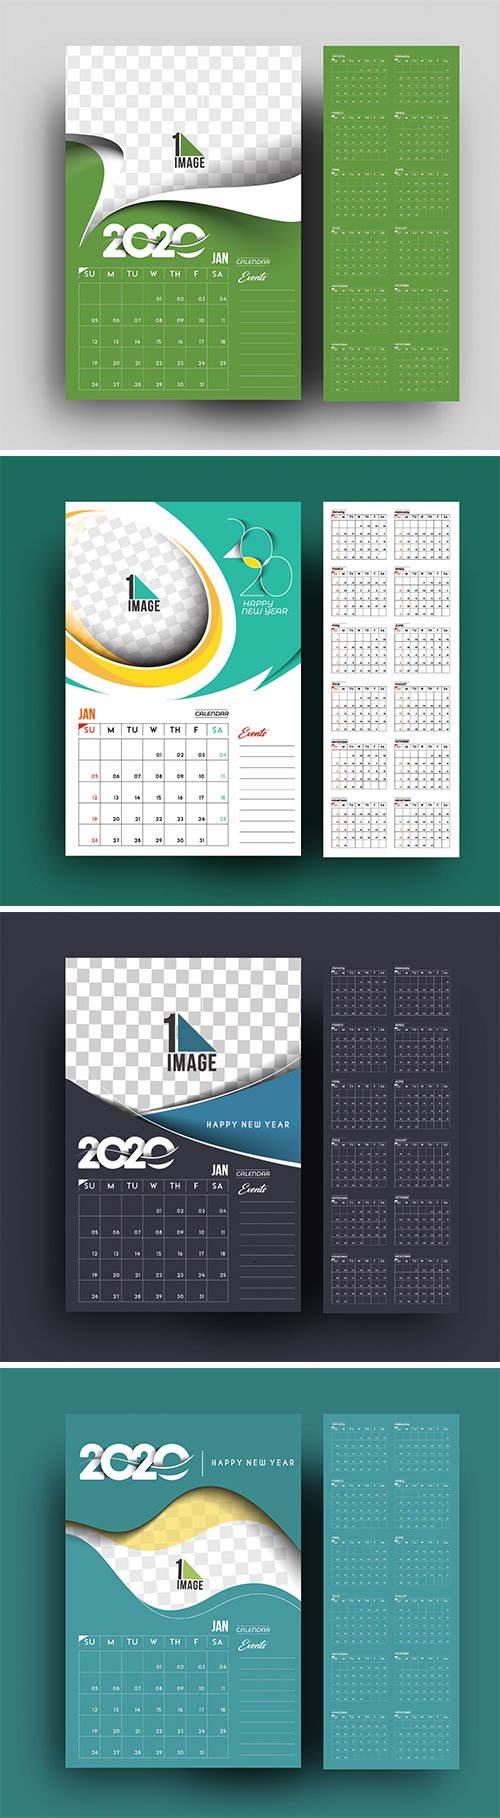 Happy new year 2020 Calendar, holiday design elements for holiday cards